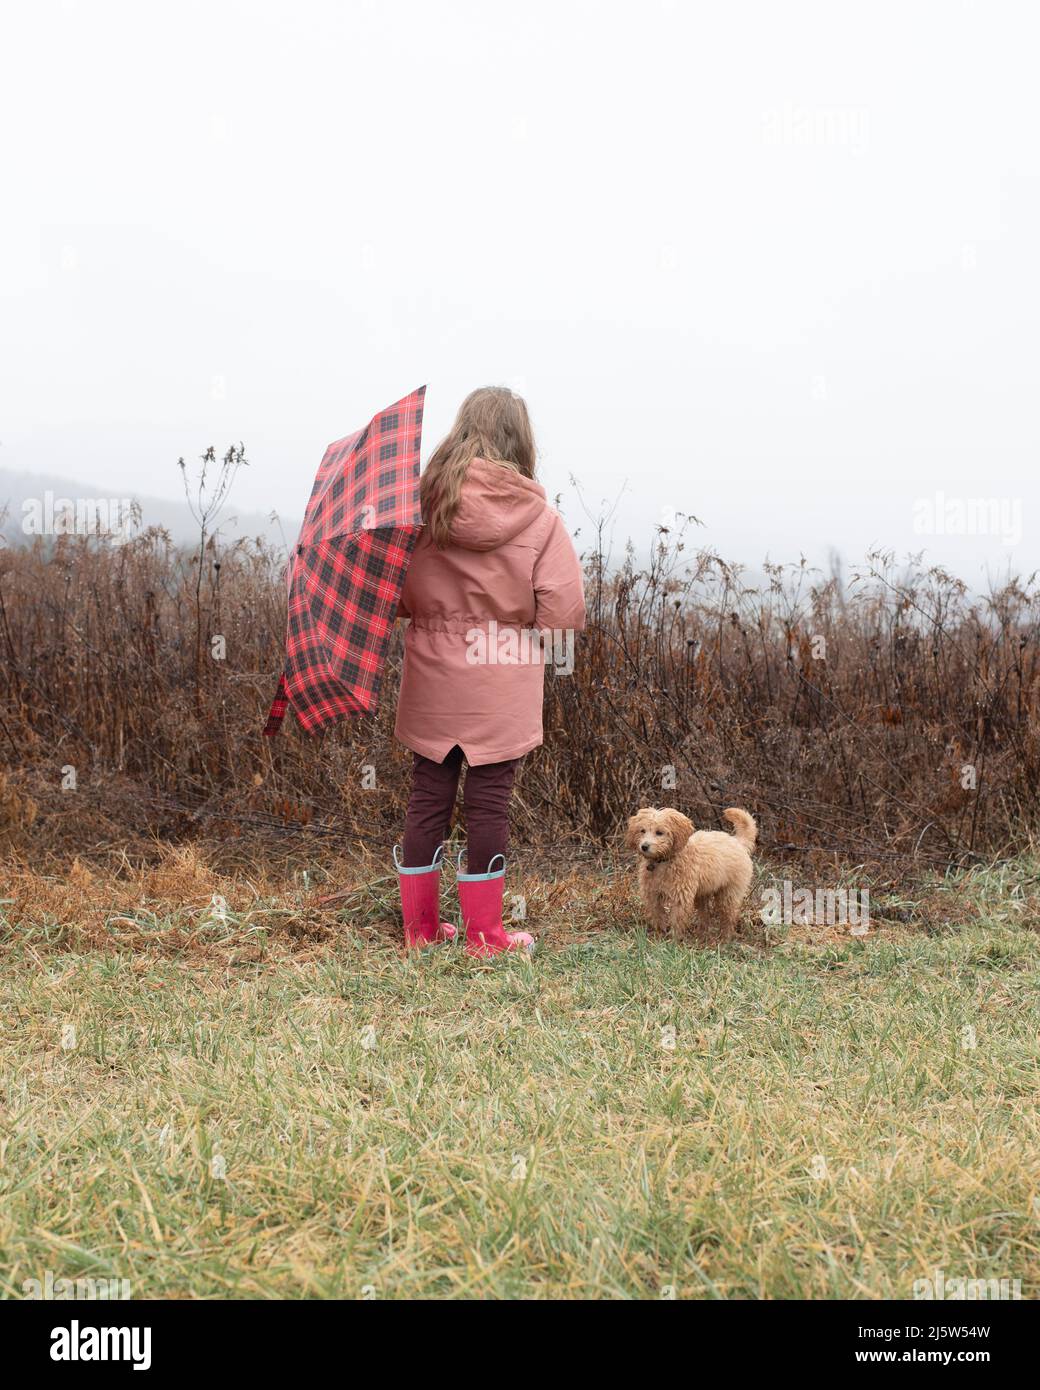 A young girl wearing rainboots and coat holding an umbrella look Stock Photo